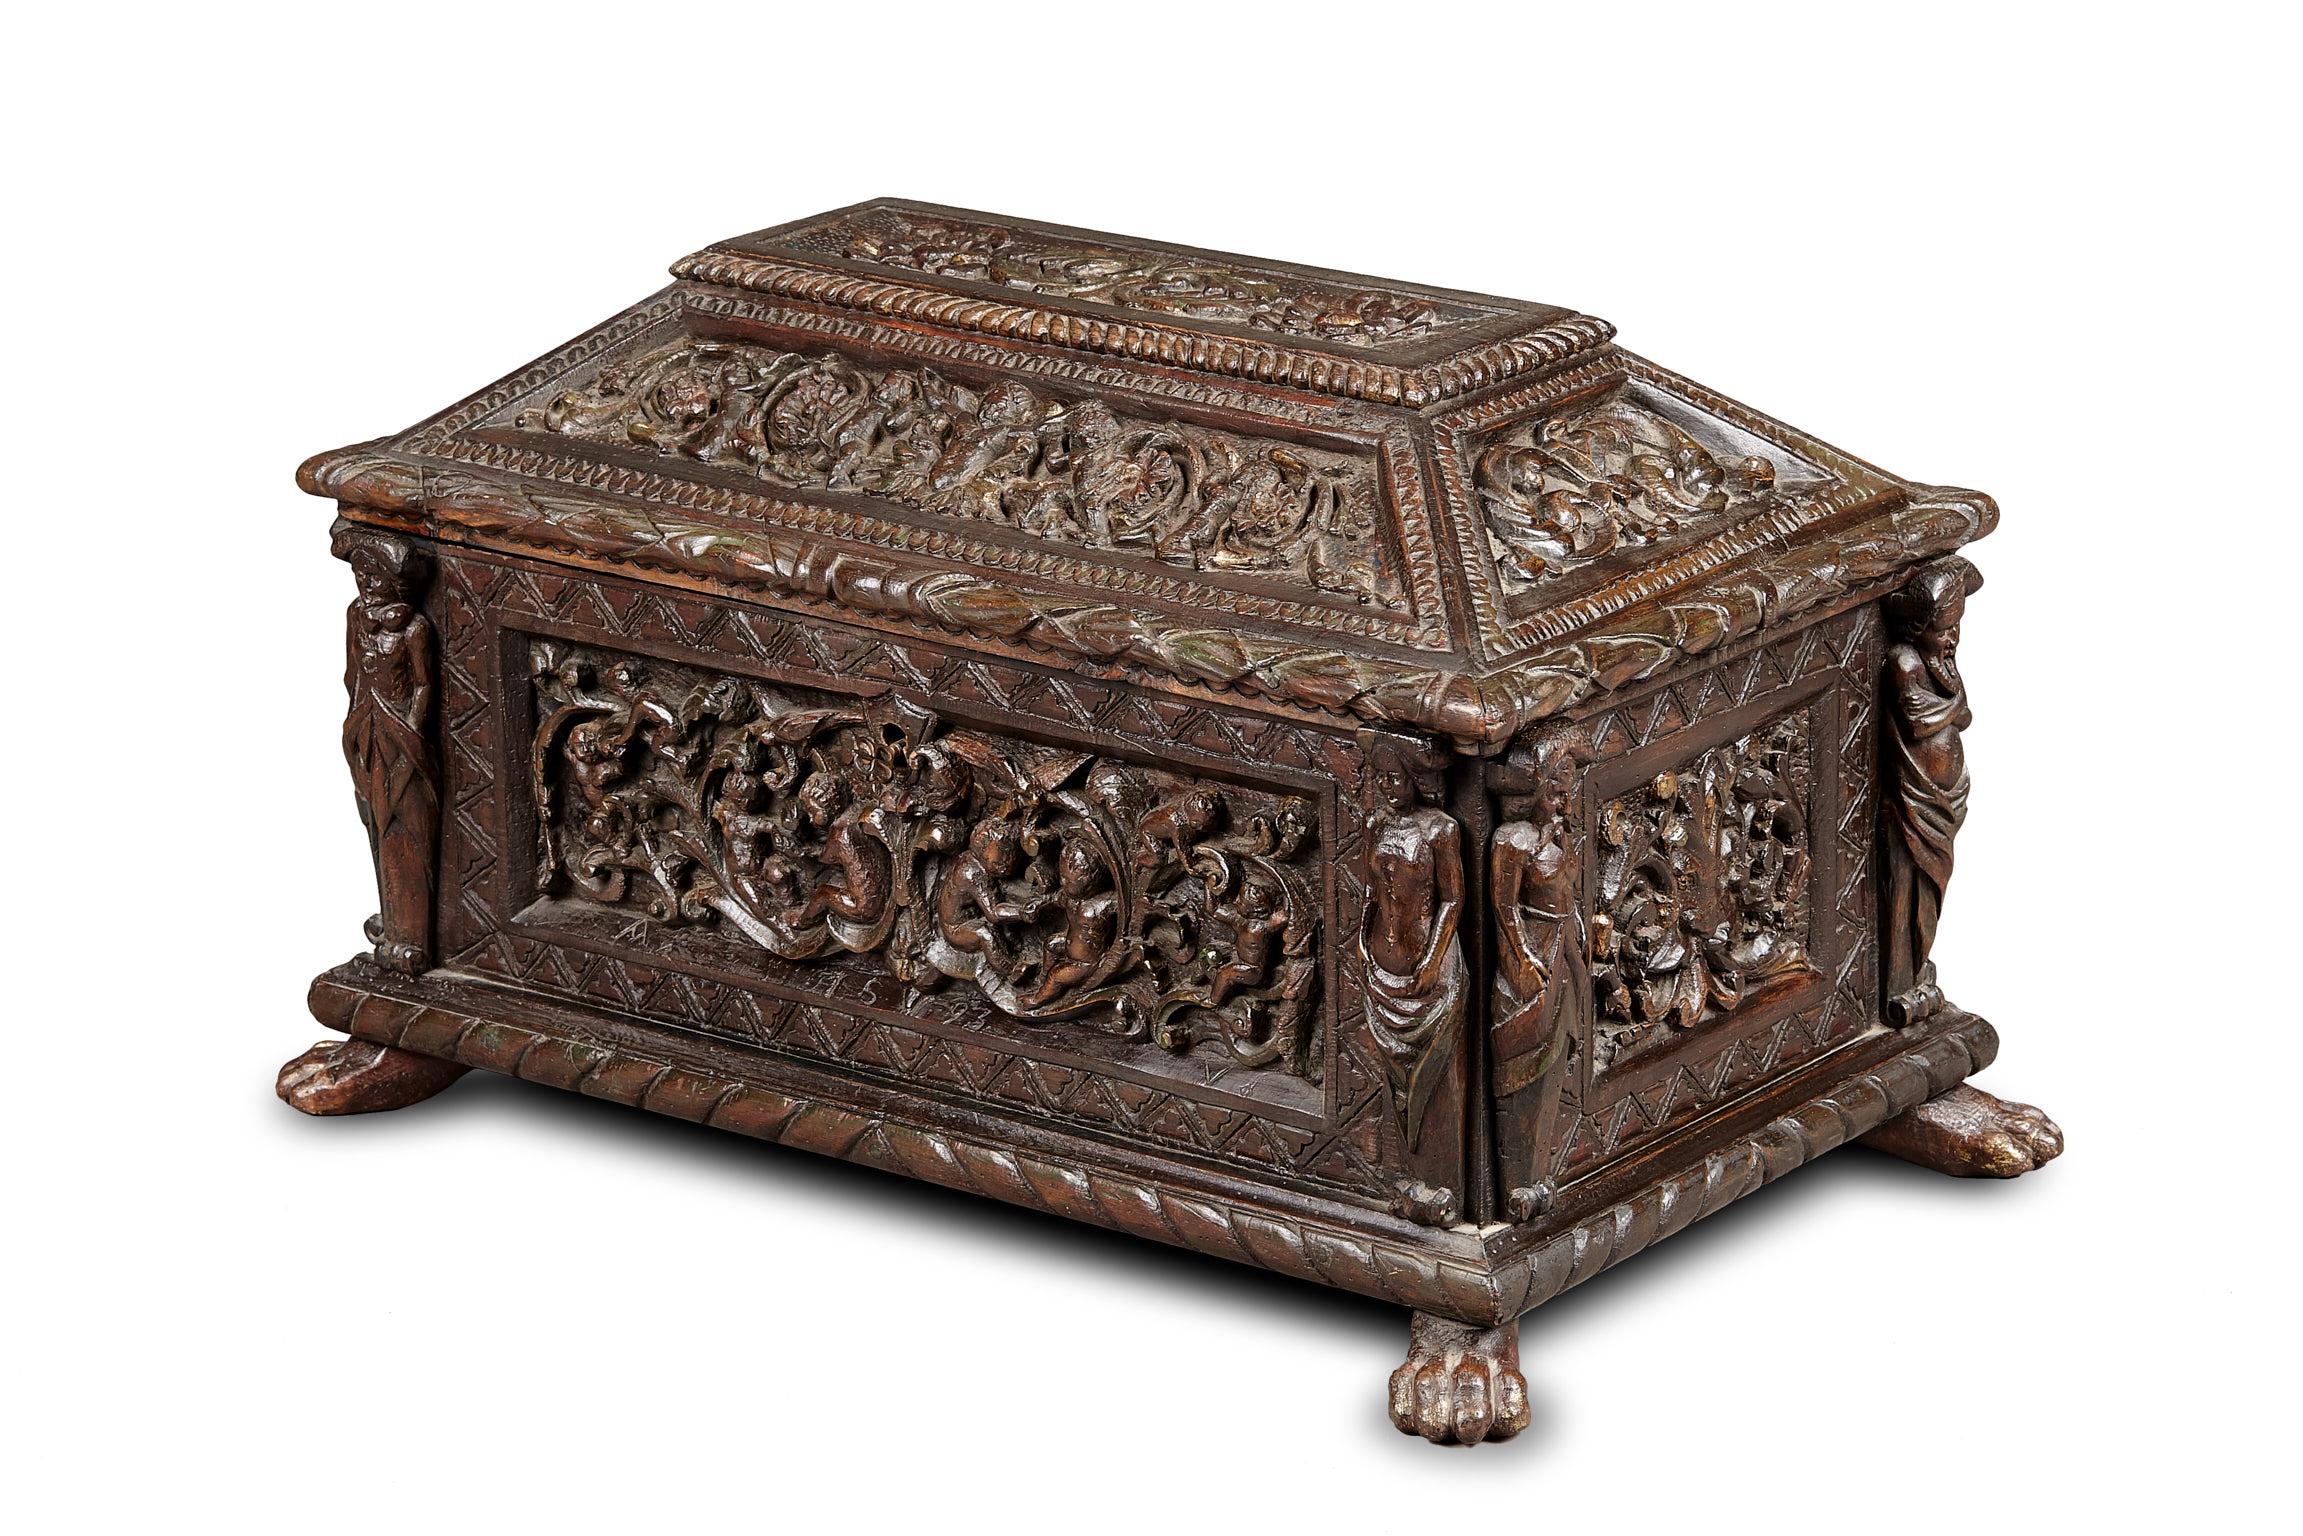 Italian Renaissance Polychrome and Gilt Casket, dated 1593 In Good Condition For Sale In Matlock, Derbyshire